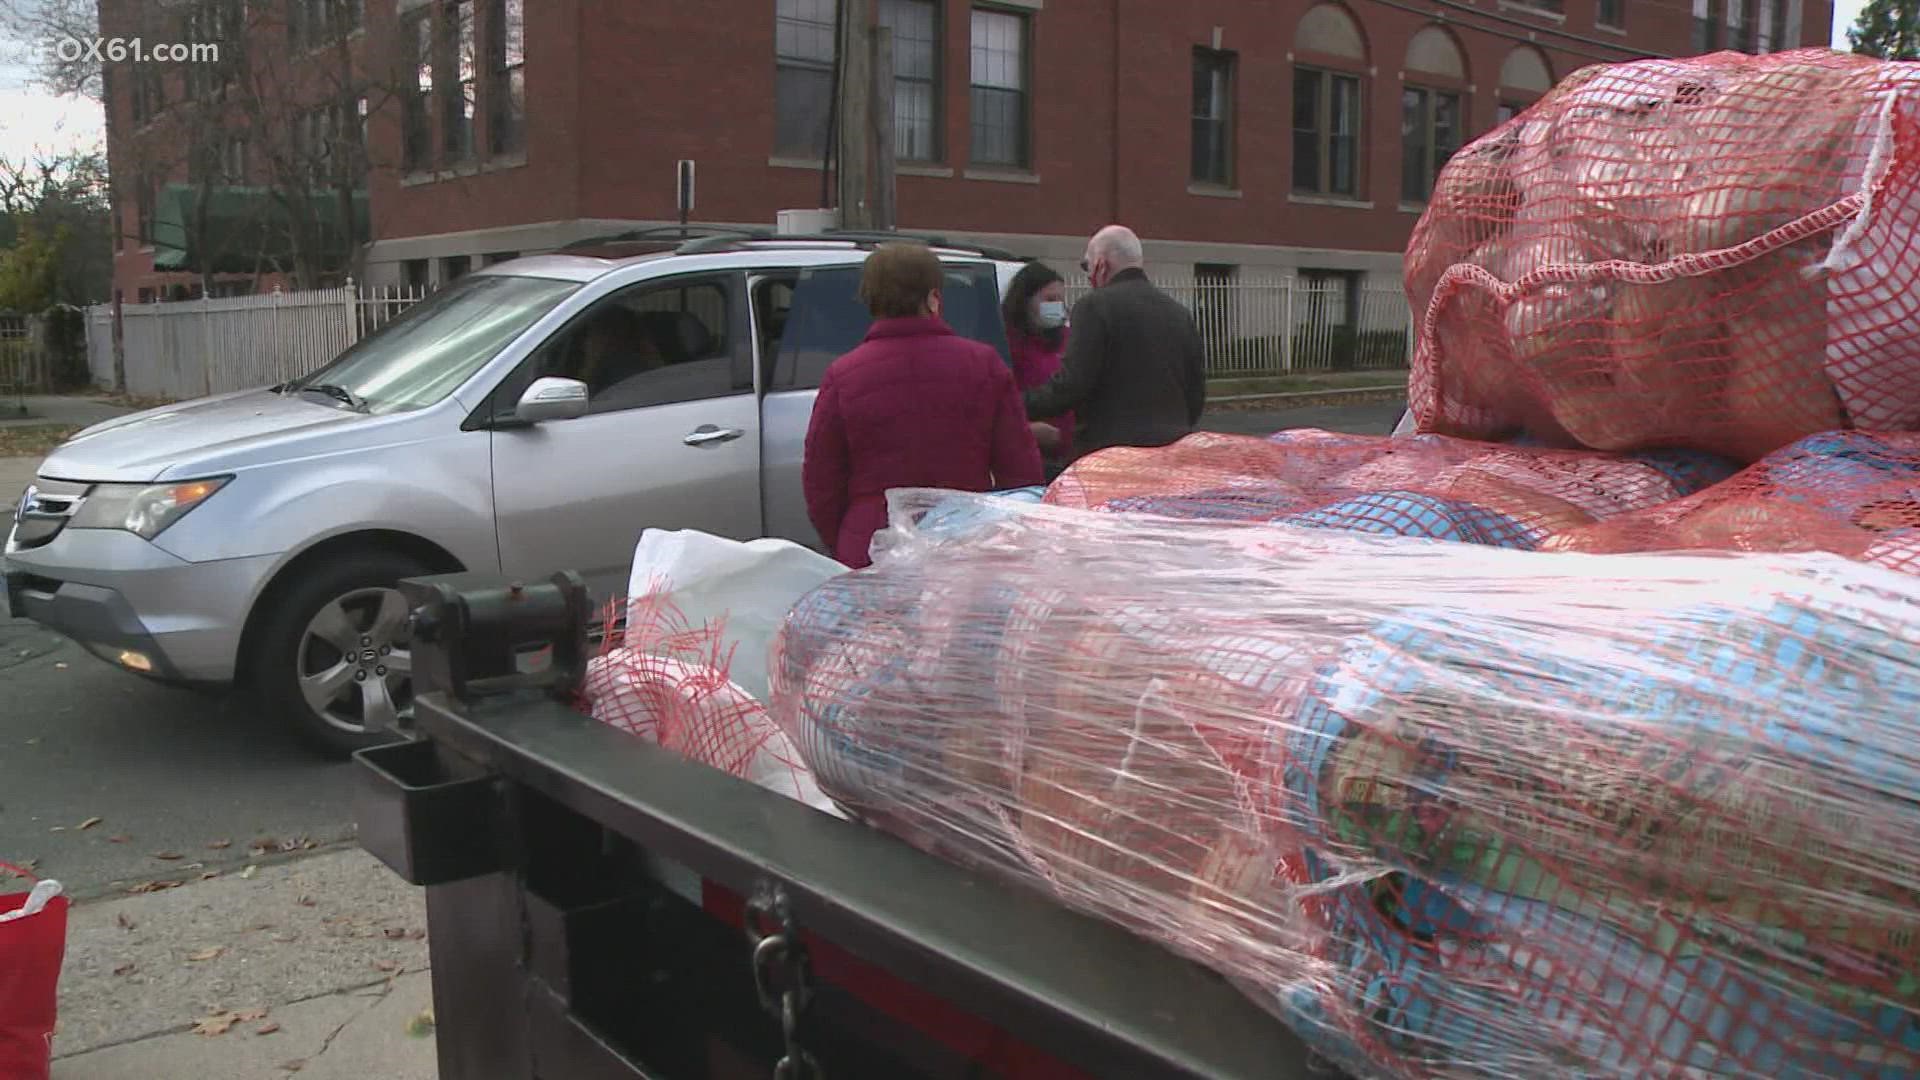 With Thanksgiving less than a week away, the Salvation Army's mission was to make sure everyone was ready.